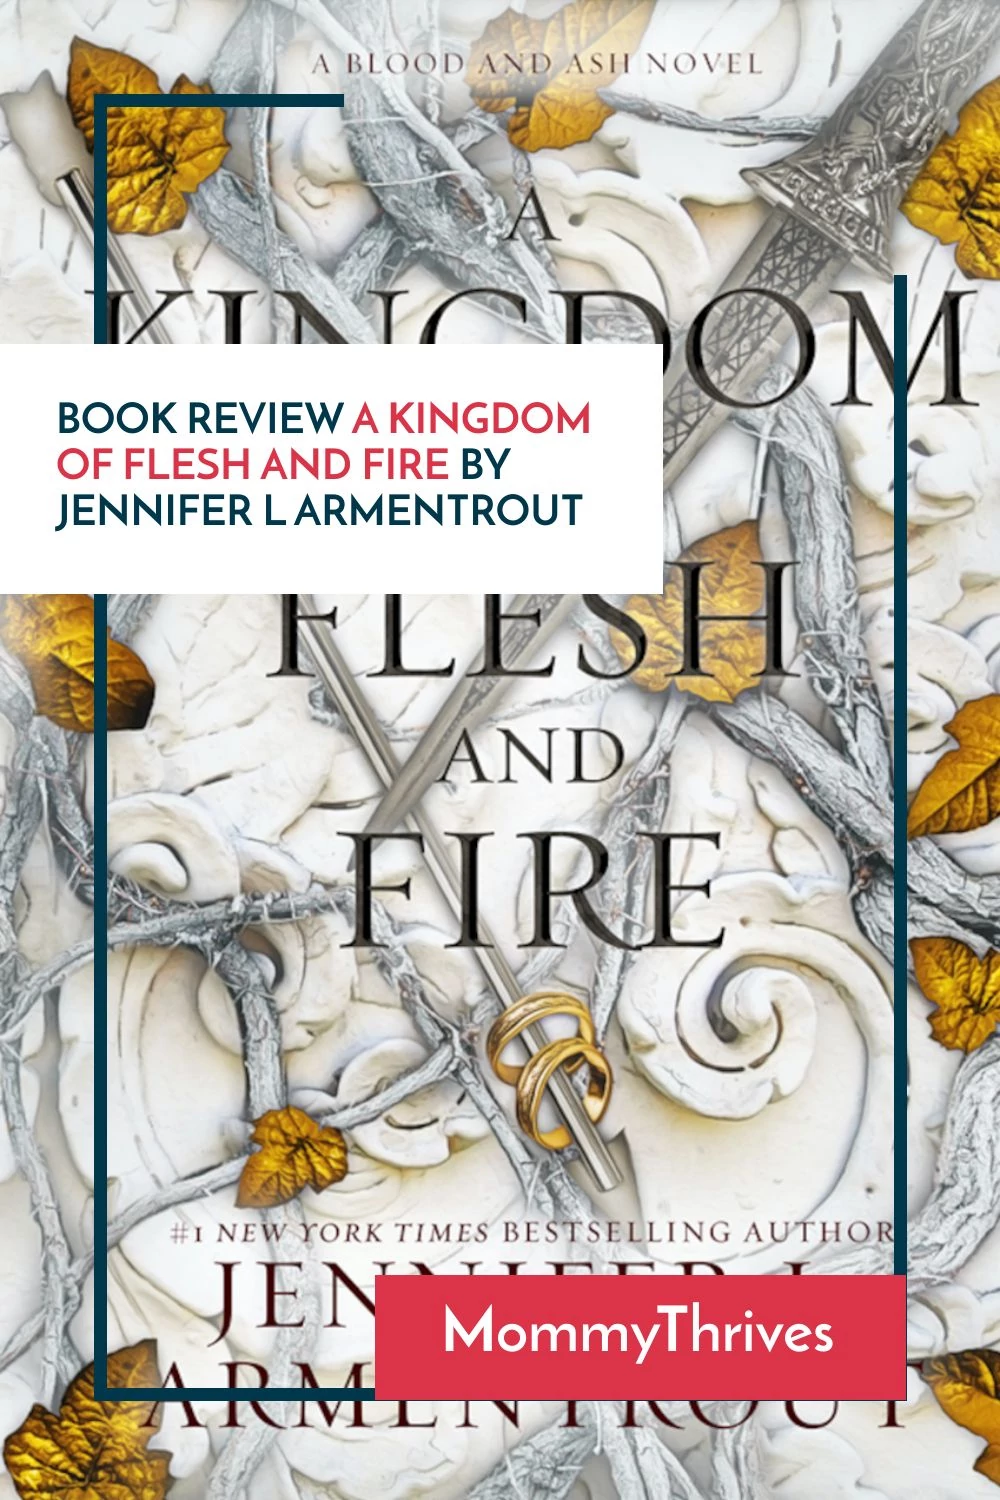 Adult Fantasy Book Review - A Kingdom of Flesh and Fire Book Review - Blood and Ash Series by Jennifer L Armentrout